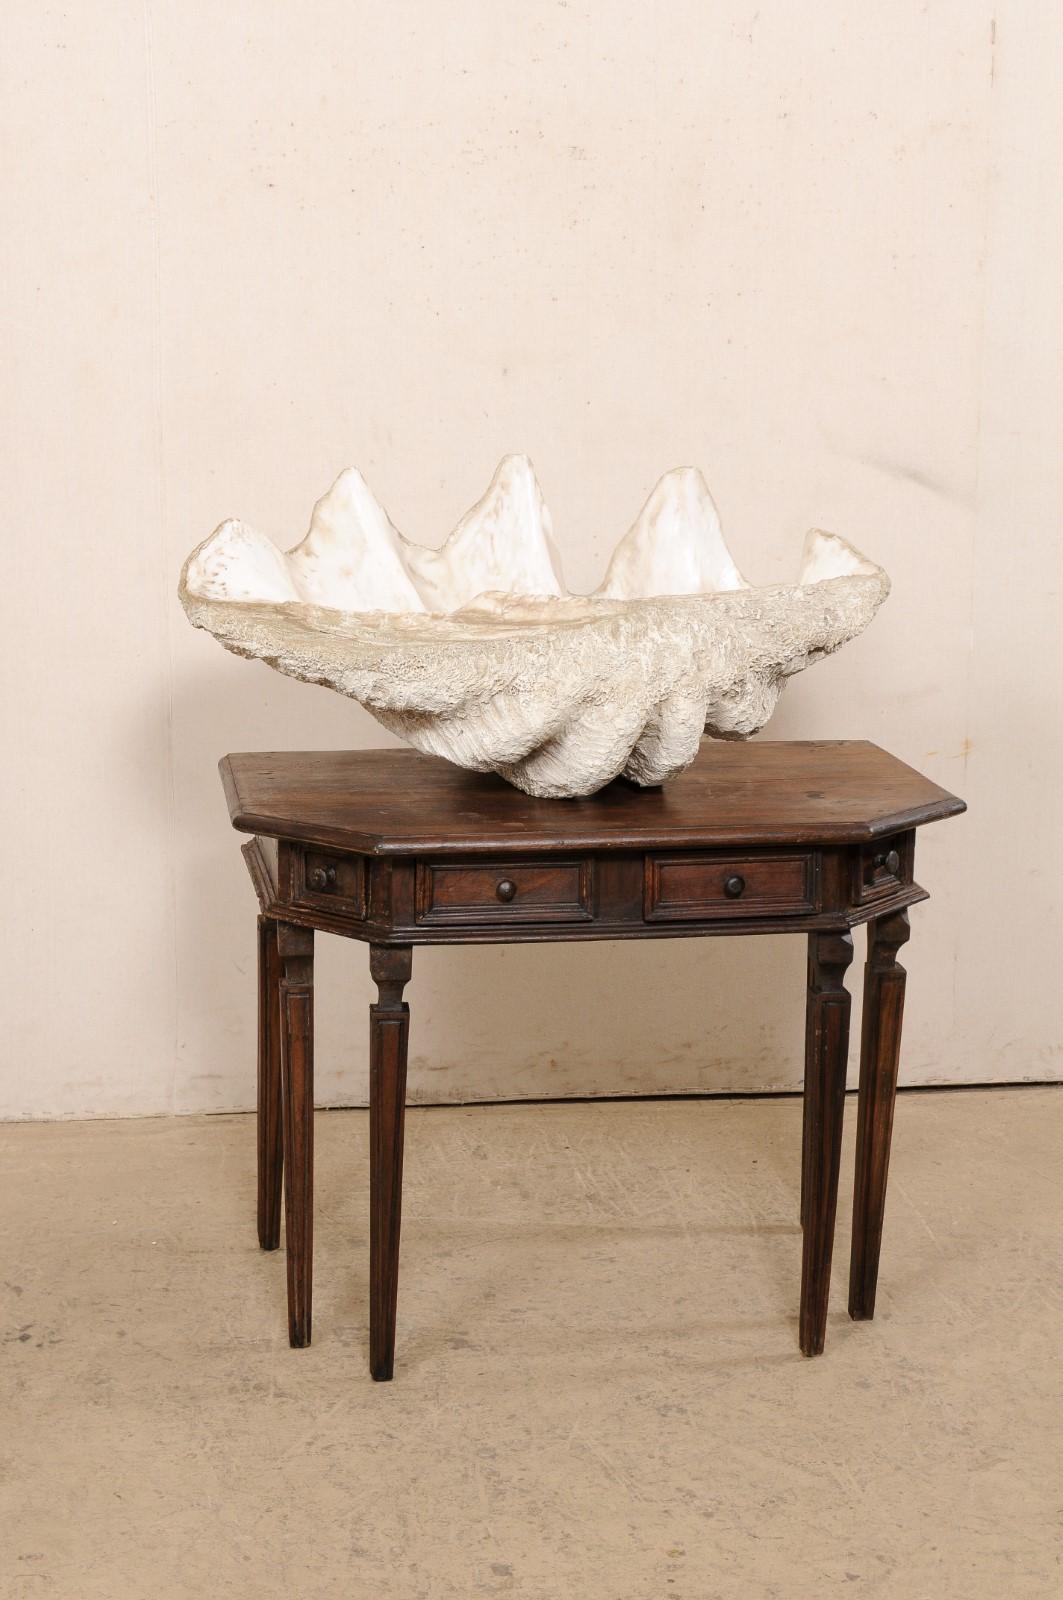 Featuring a giant faux clam shell which looks and feels like the real thing! A replica of Nature's art at its finest; this vintage composite sculpture shell exemplifies fabulous craftsmanship. It has that perfectly bleached-white color (with slight